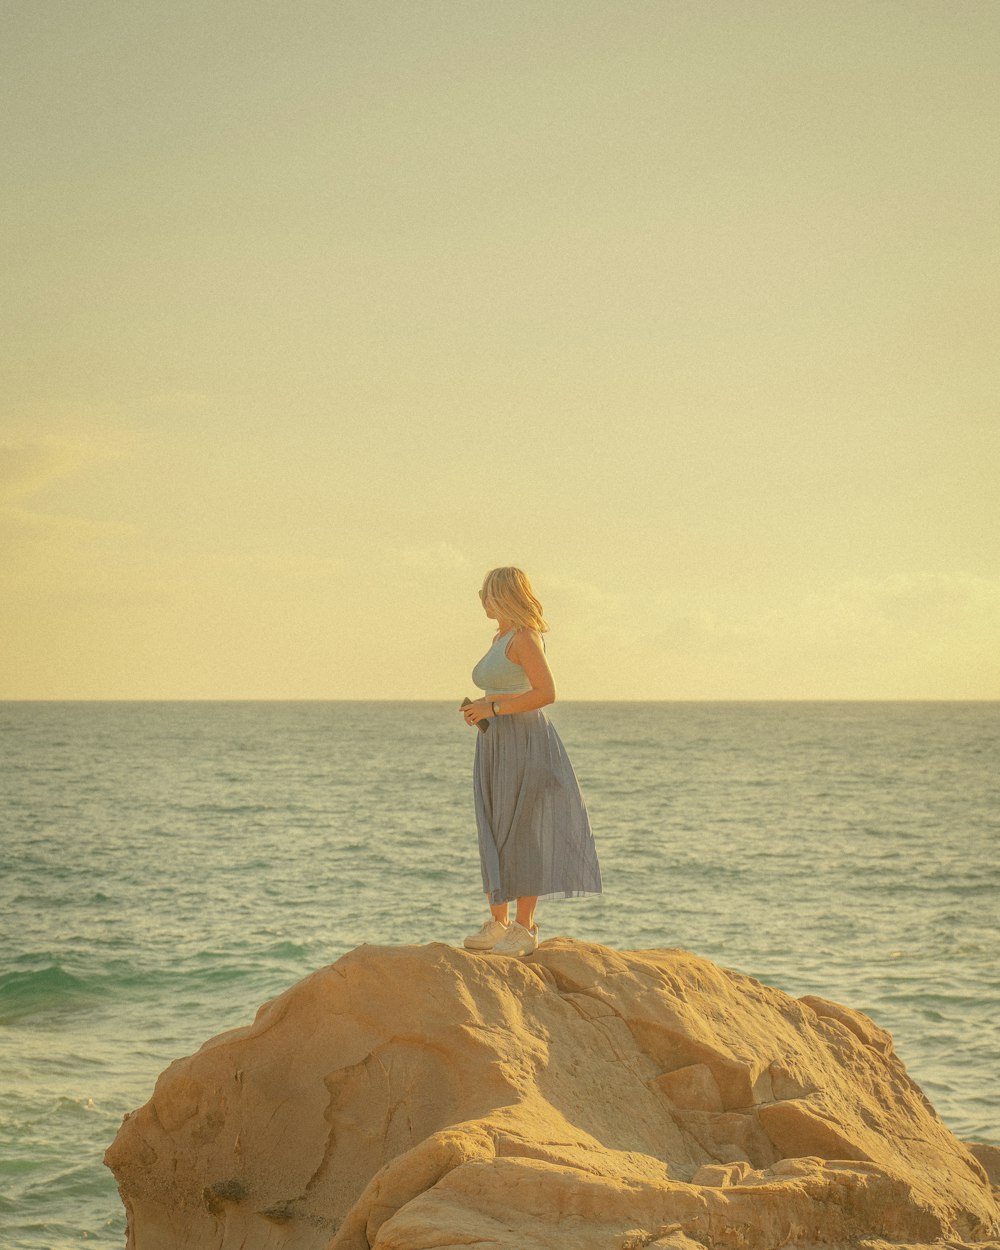 woman in white dress standing on brown rock formation near body of water during daytime